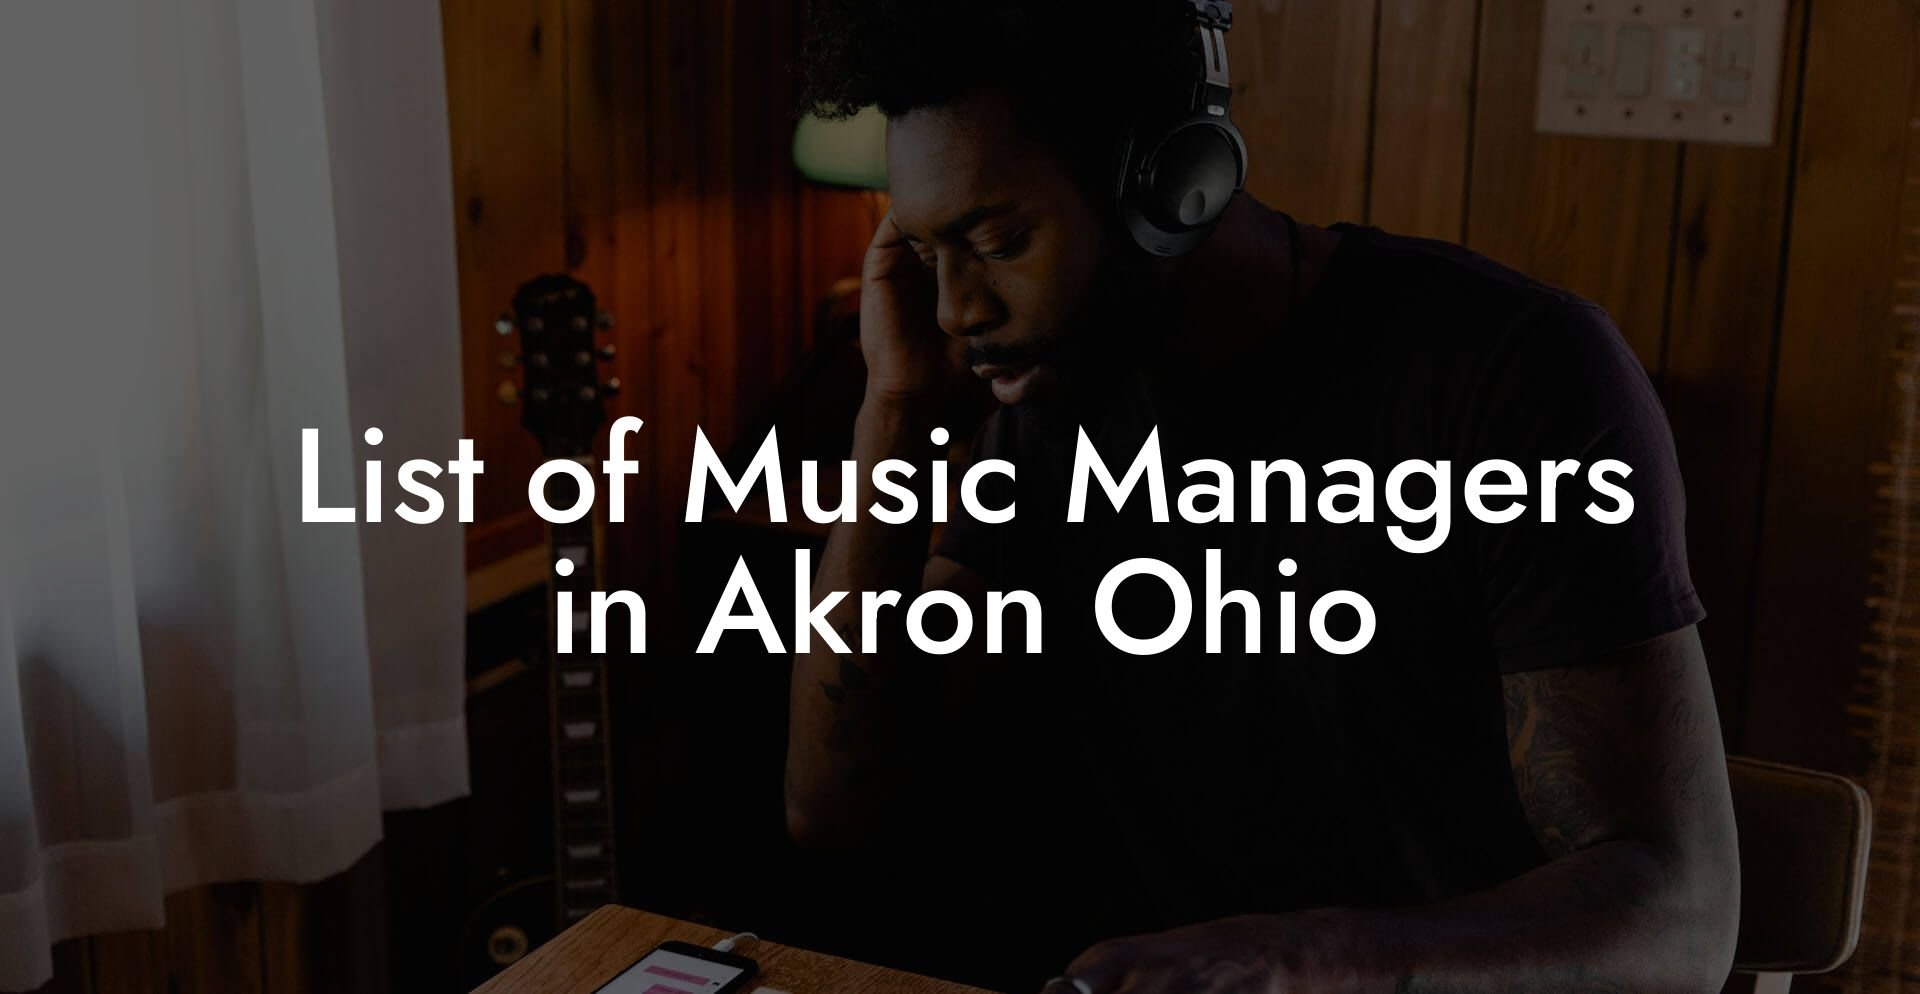 List of Music Managers in Akron Ohio